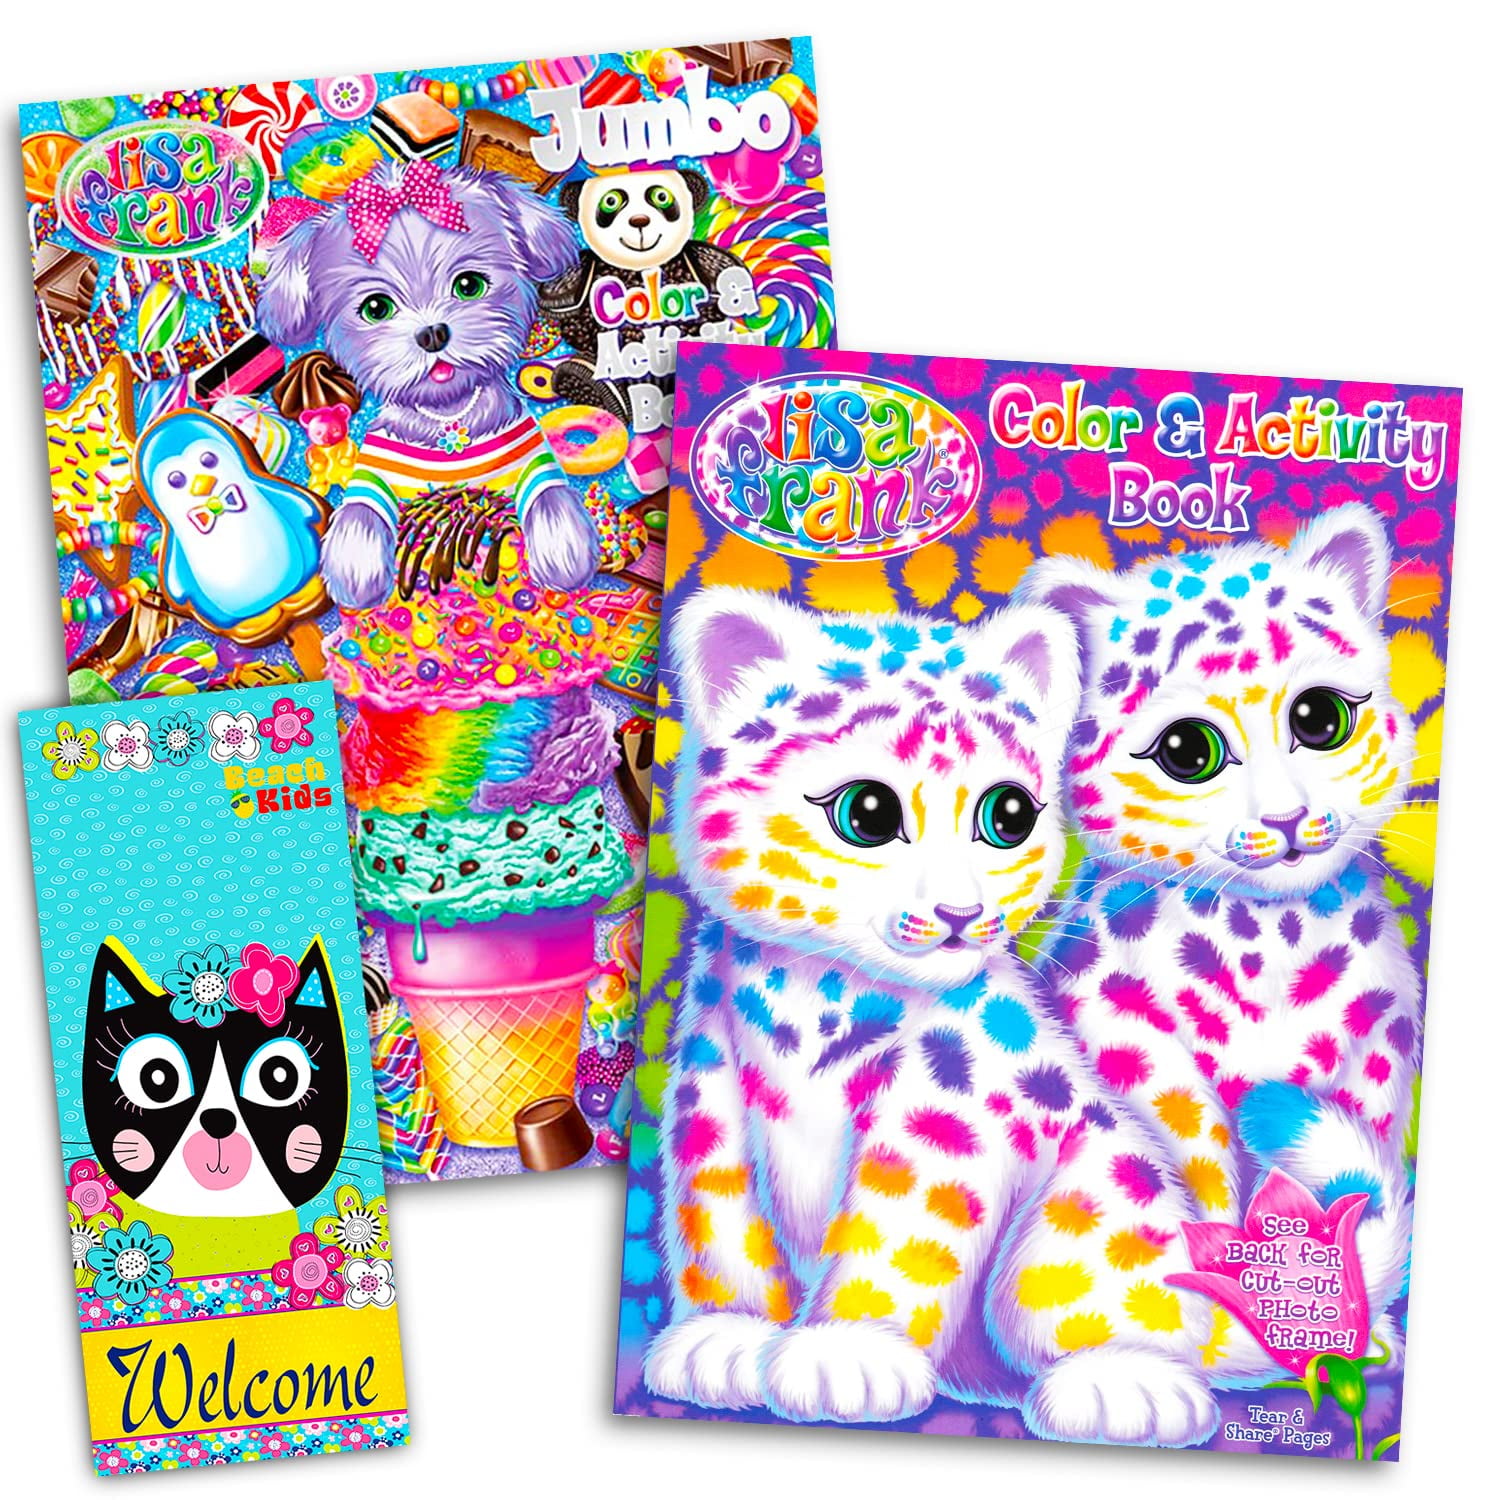 Giant Lisa Frank Activity and Coloring Book With Crayola Crayons